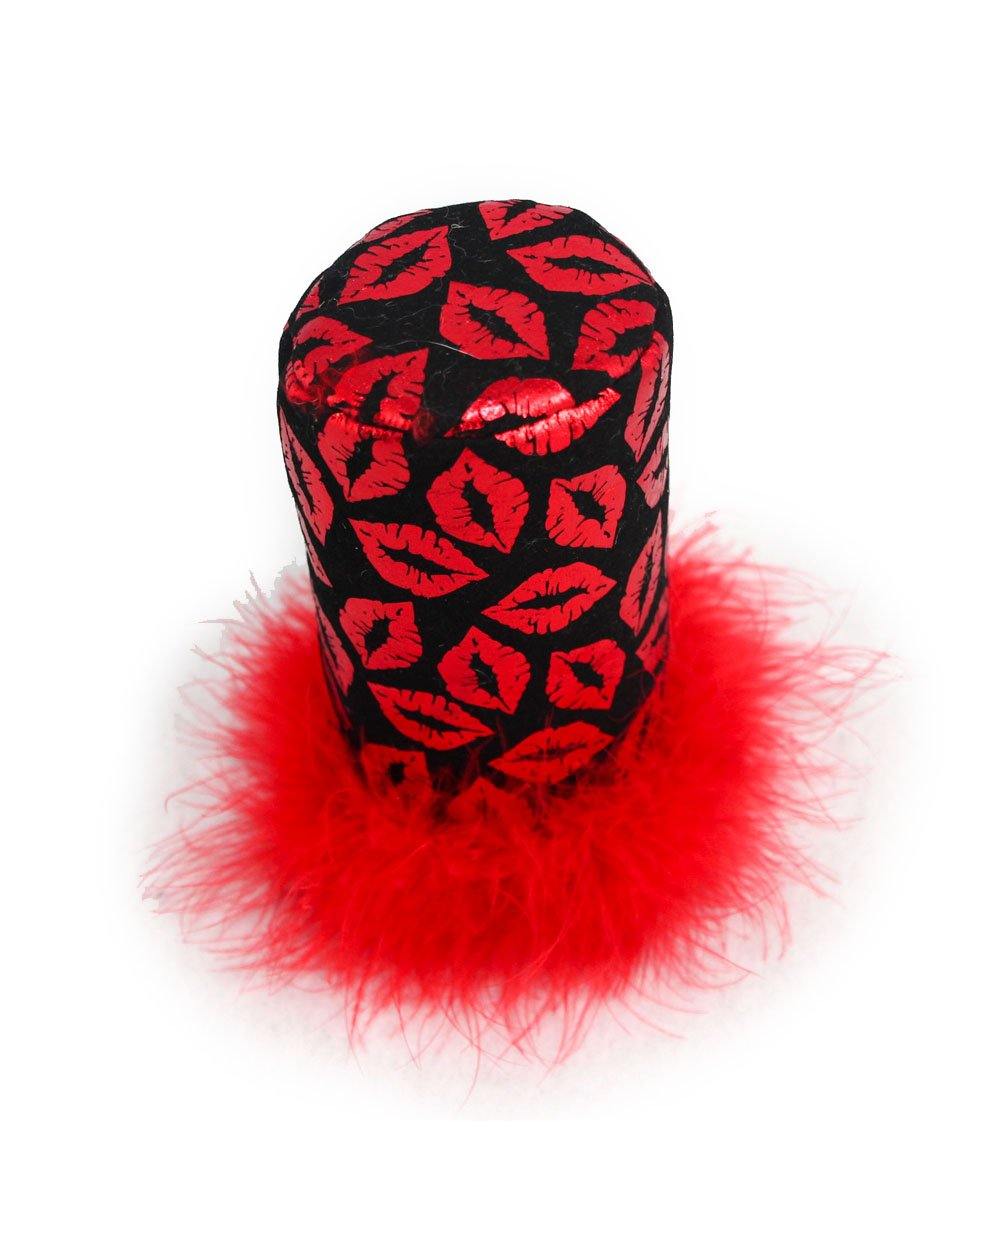 Insulated Beer Koozie by Tipsy Totes in Red Sexy Lip Print with Fur